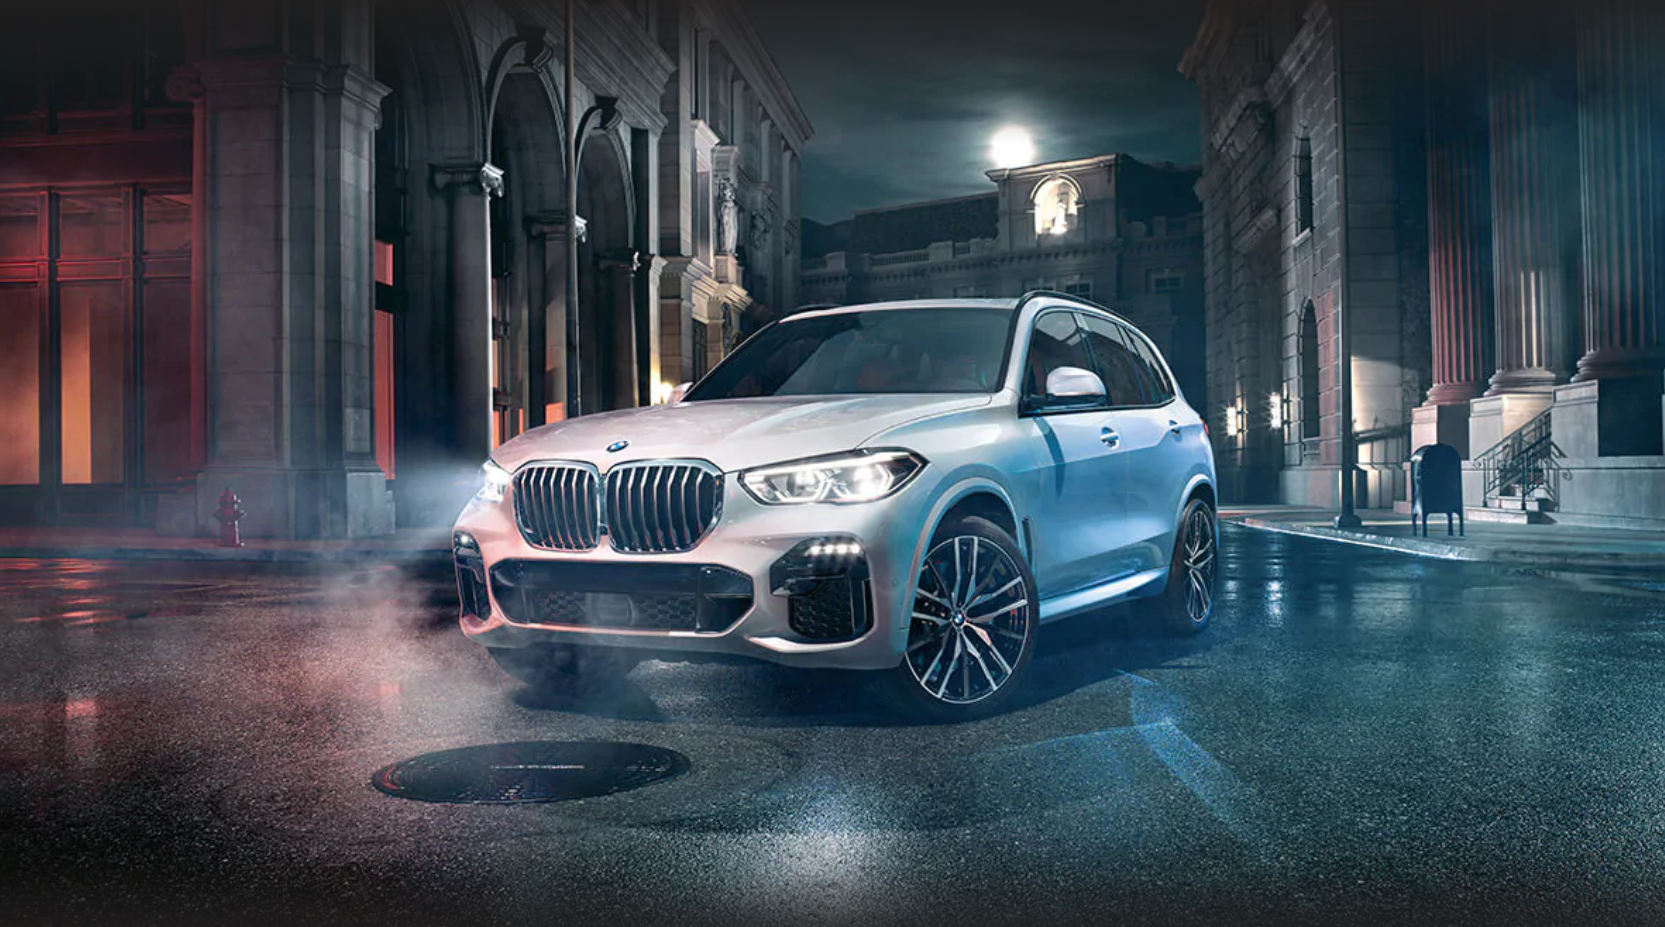 The 2020 BMW X5: Next Generation Design and Performance